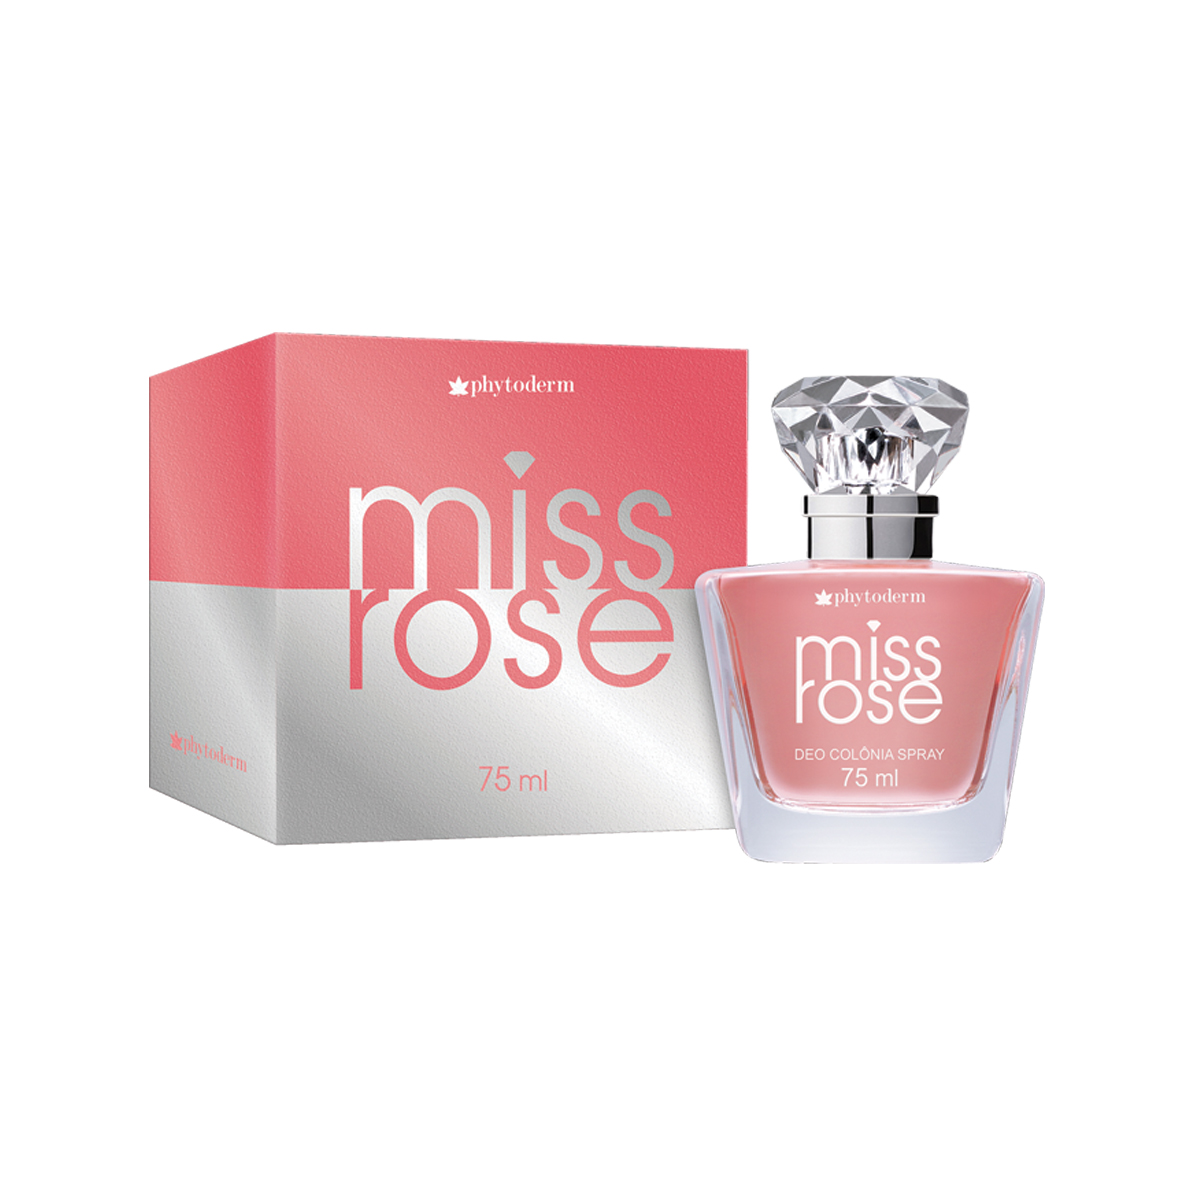 DEO COLONIA PHYTODERM 75ML MISS ROSE